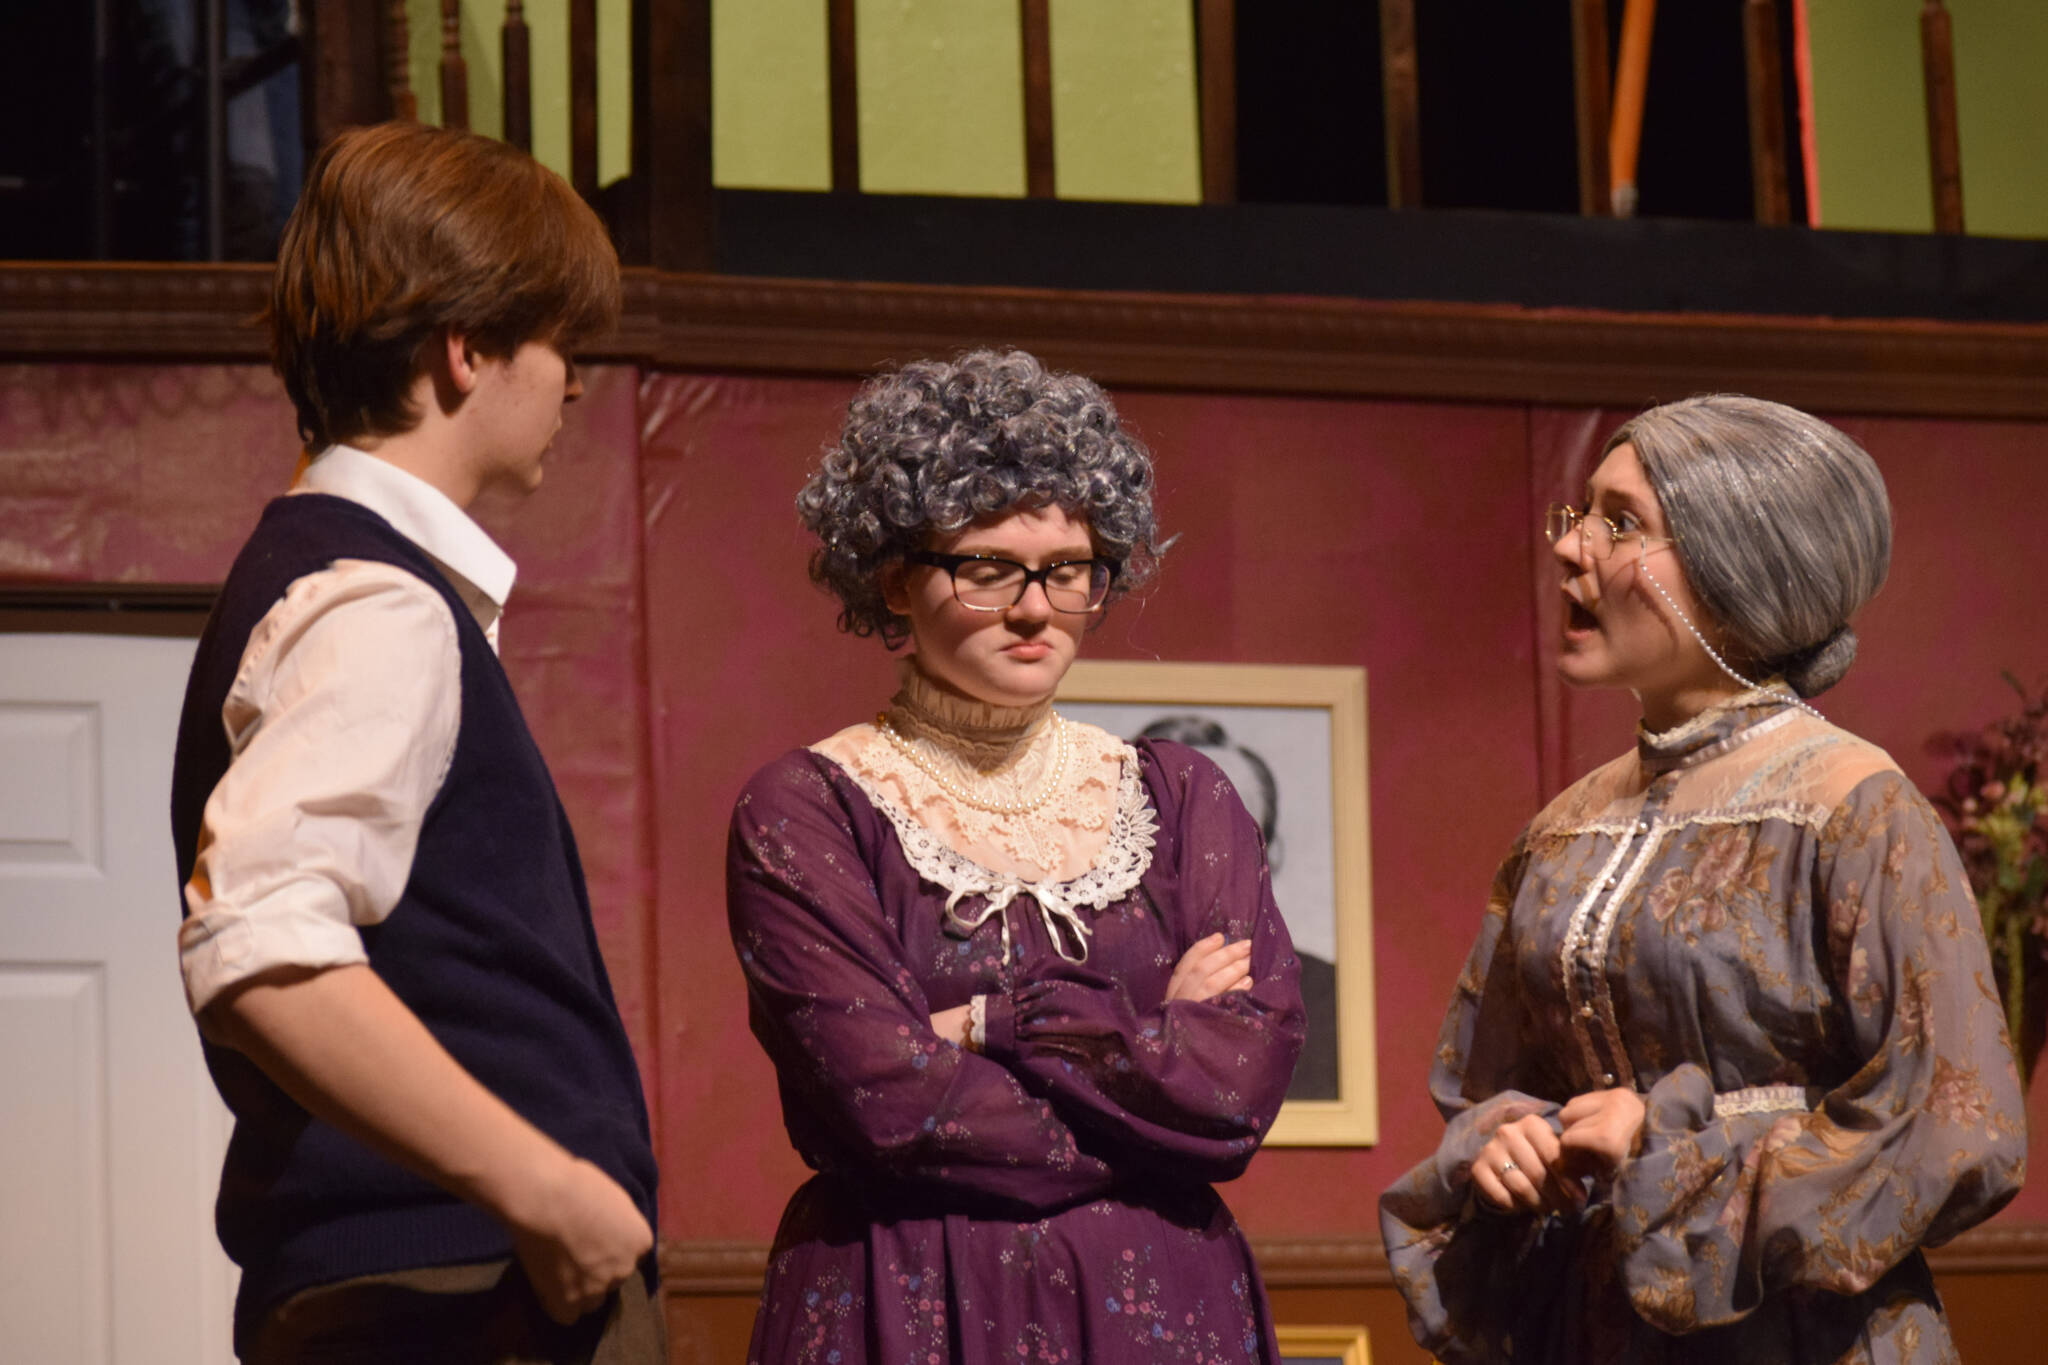 Left to right: Darek Hatten, Aidan Bon and Sophia Micciche rehearse “Arsenic and Old Lace” at Soldotna High School on Tuesday, April 26, 2022. (Camille Botello/Peninsula Clarion)